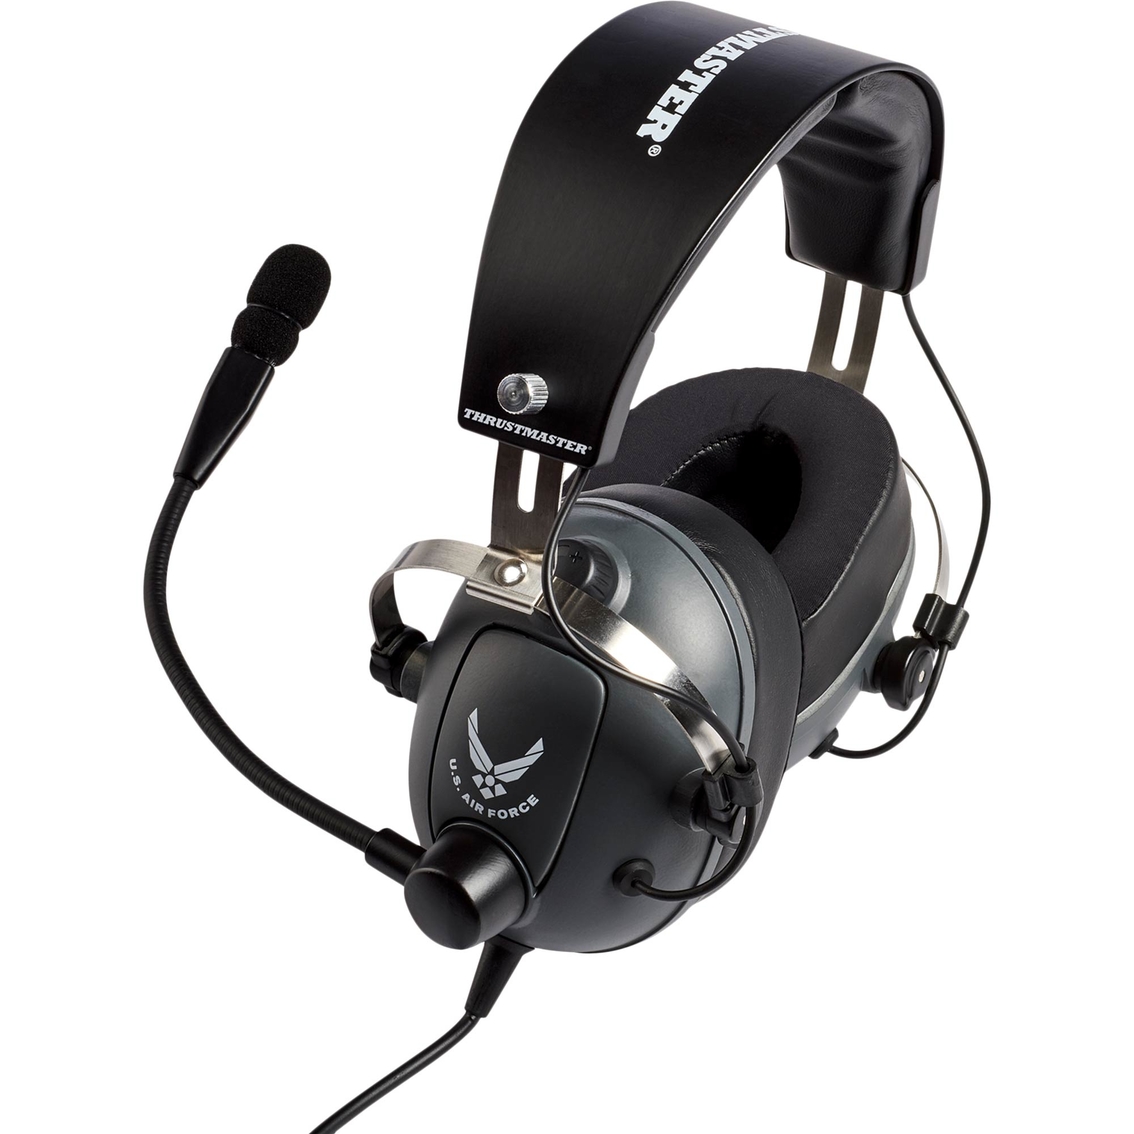 Thrustmaster T.Flight Gaming Headset (US Air Force Edition) - Image 8 of 10